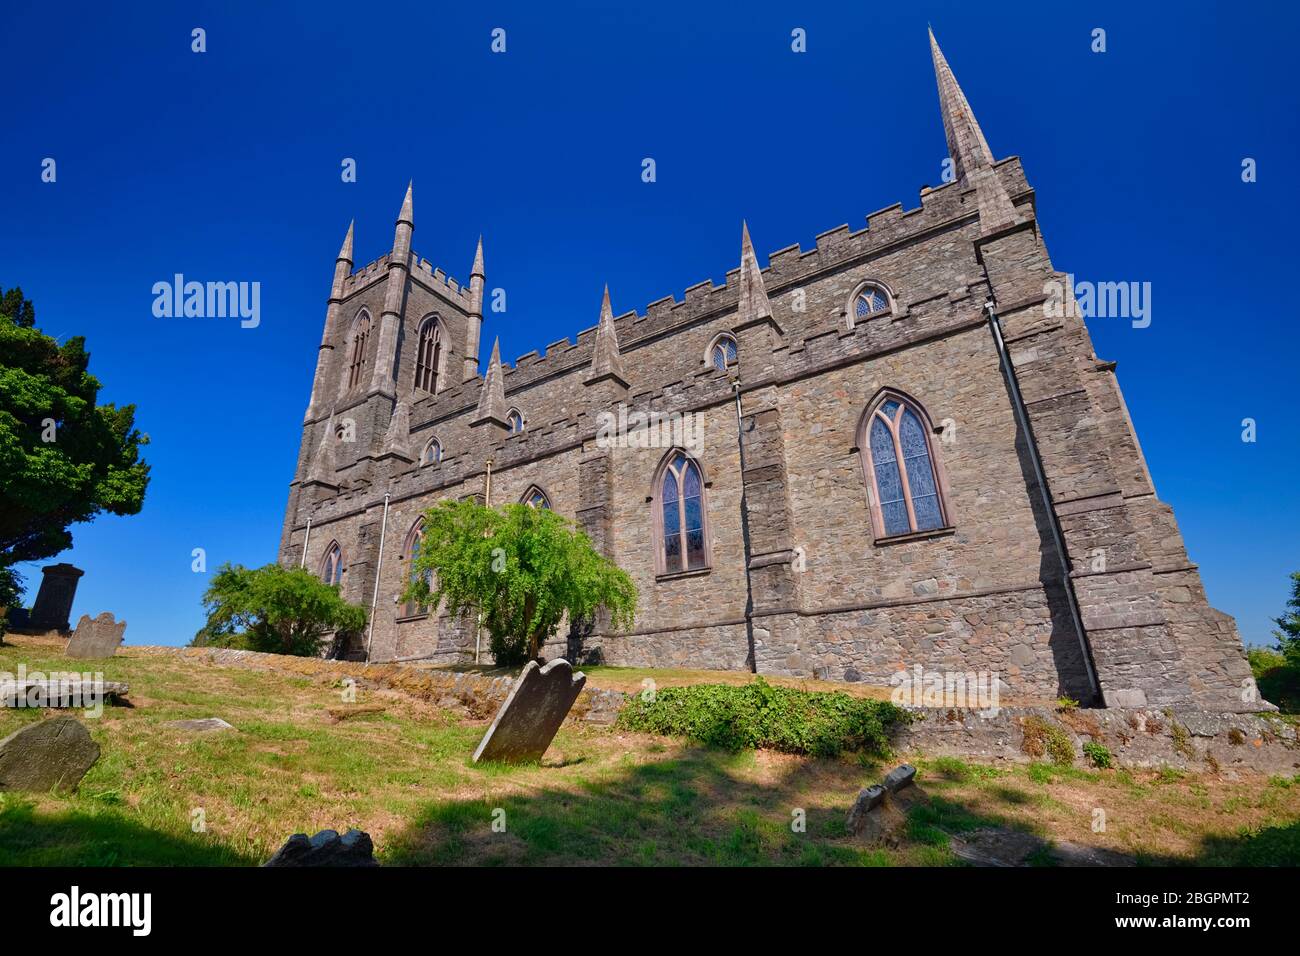 Ireland, County Down, Downpatrick, Cathedral Church of the Holy Trinity also known as Down Cathedral, reputed burial place of St Patrick Ireland's patron saint. Stock Photo